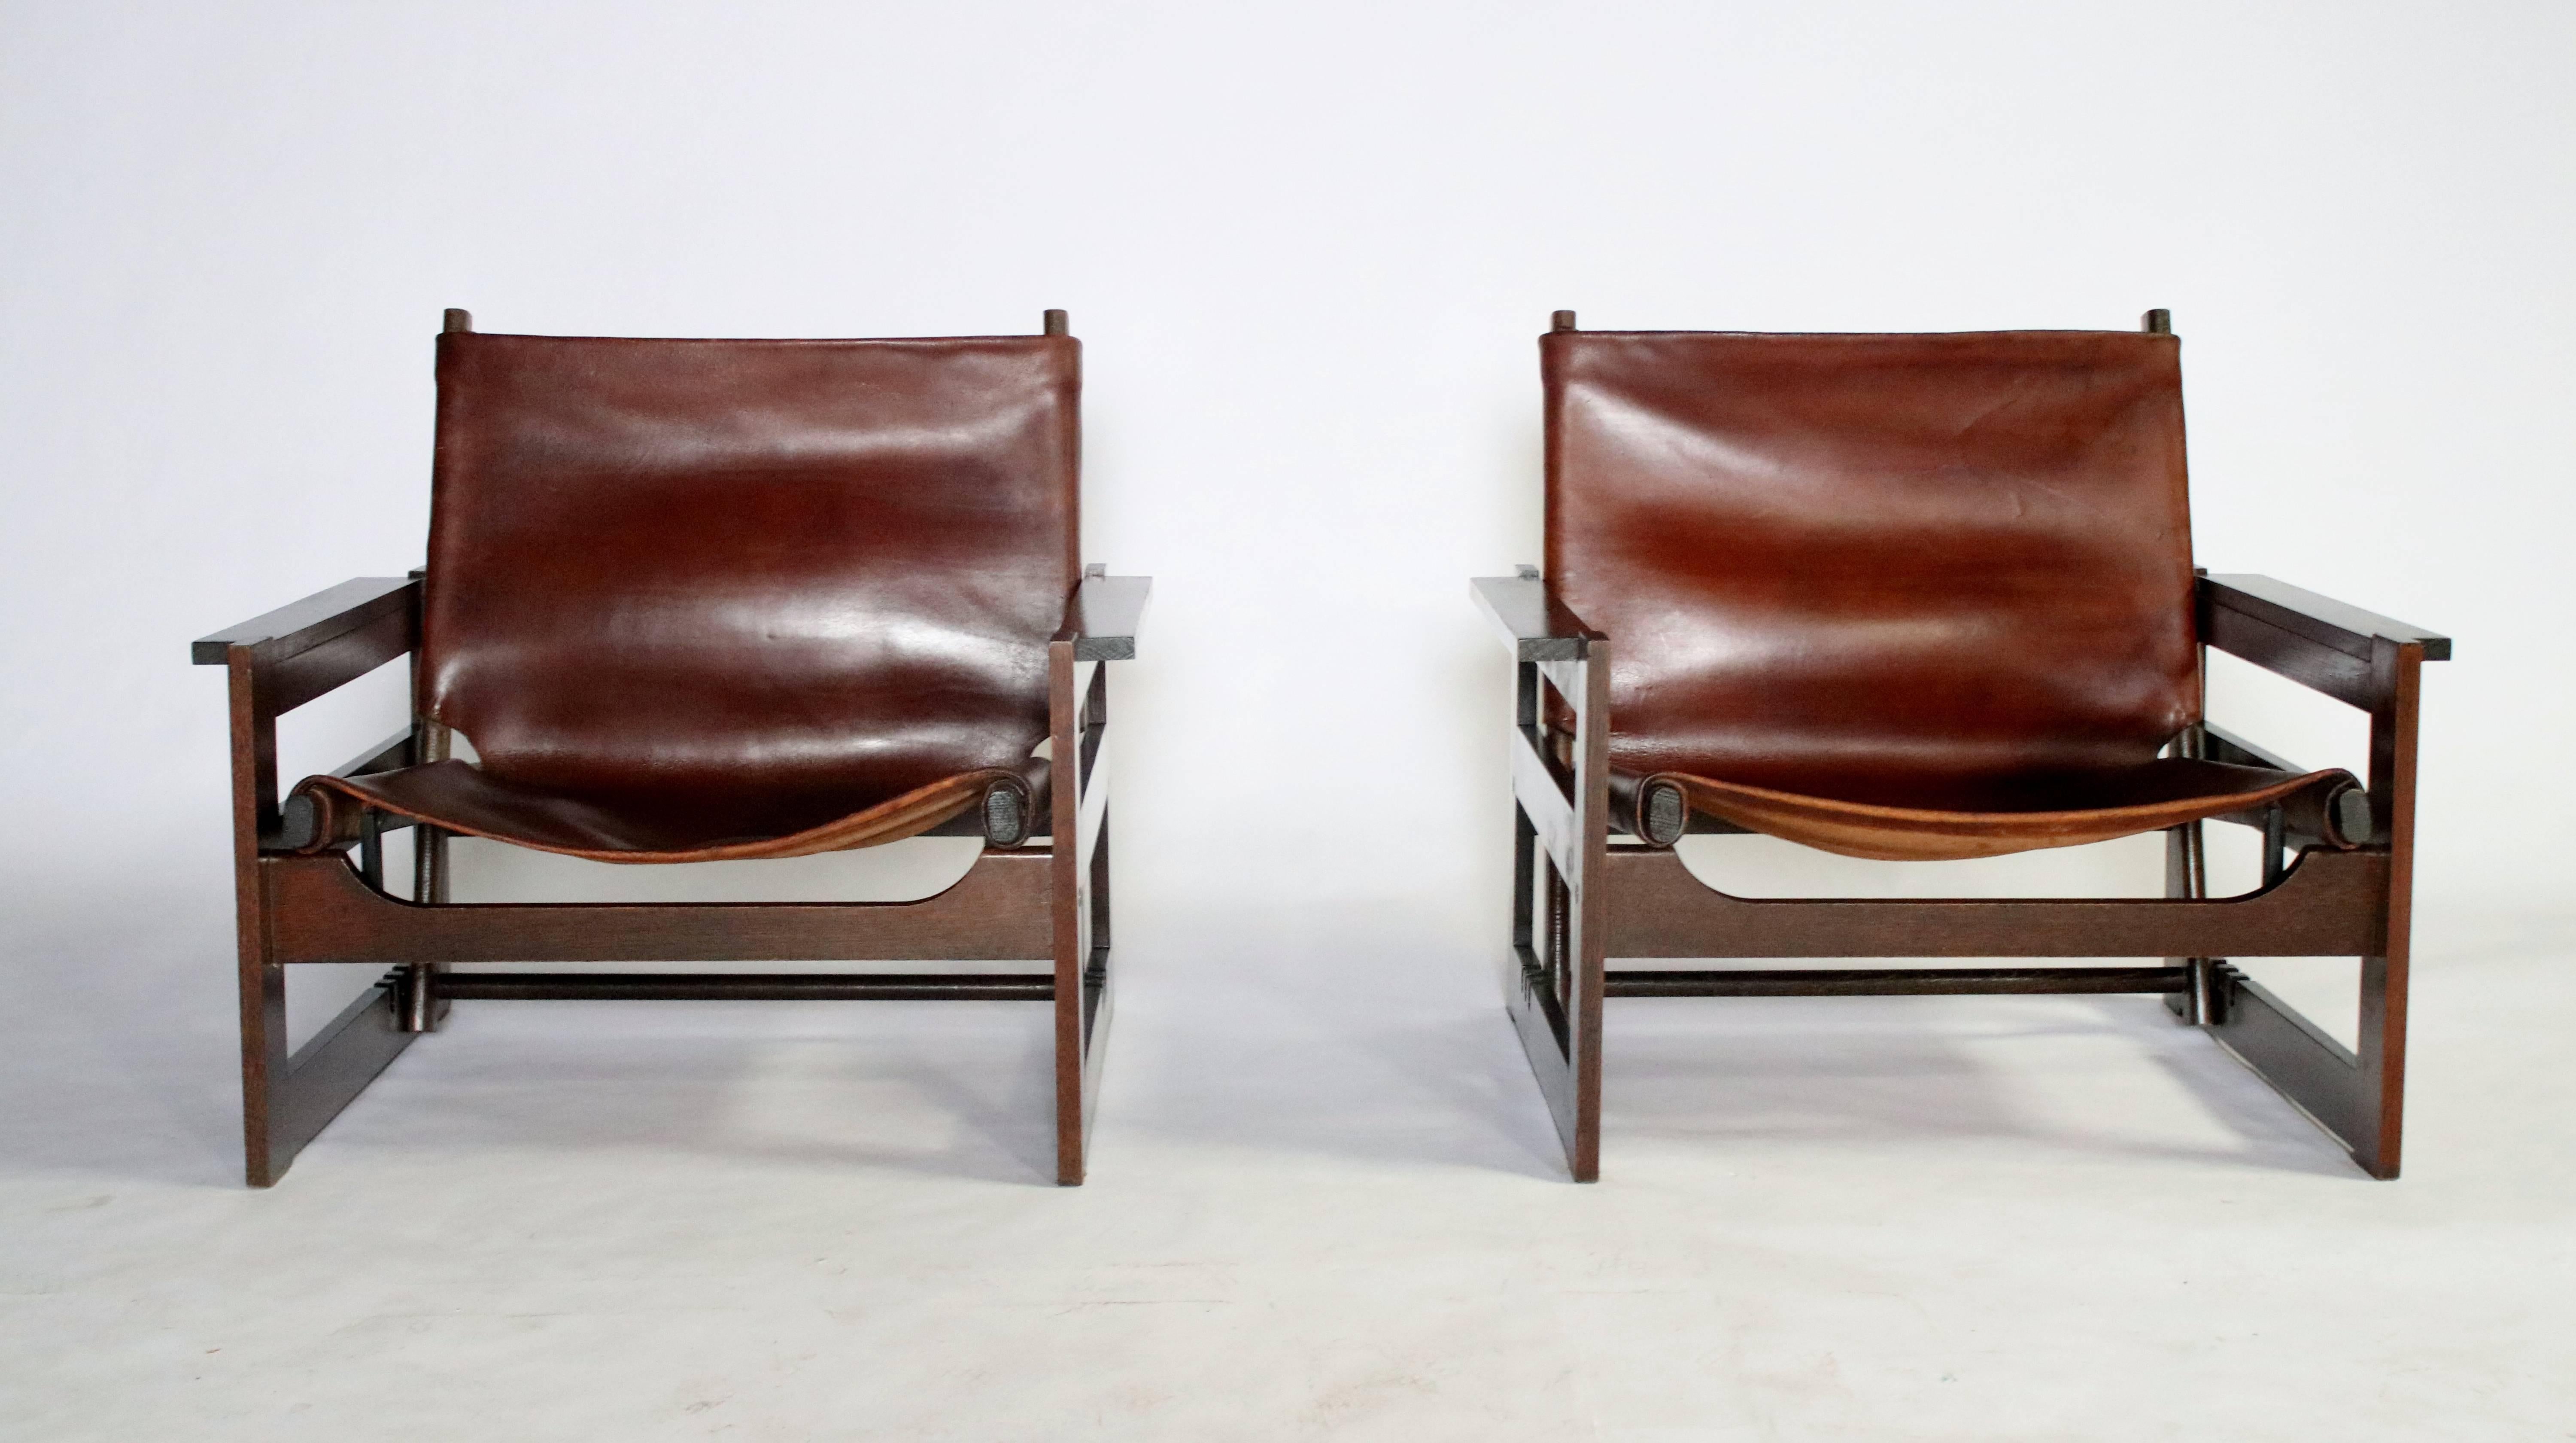 Brazilian modern removable and adjustable leather sling or hunting chairs insert into a wood cube frame. Adjustable sling can be removed or placed in one of three reclining positions. Unmarked, in the style of Sergio Rodrigues, Michel Arnoult or